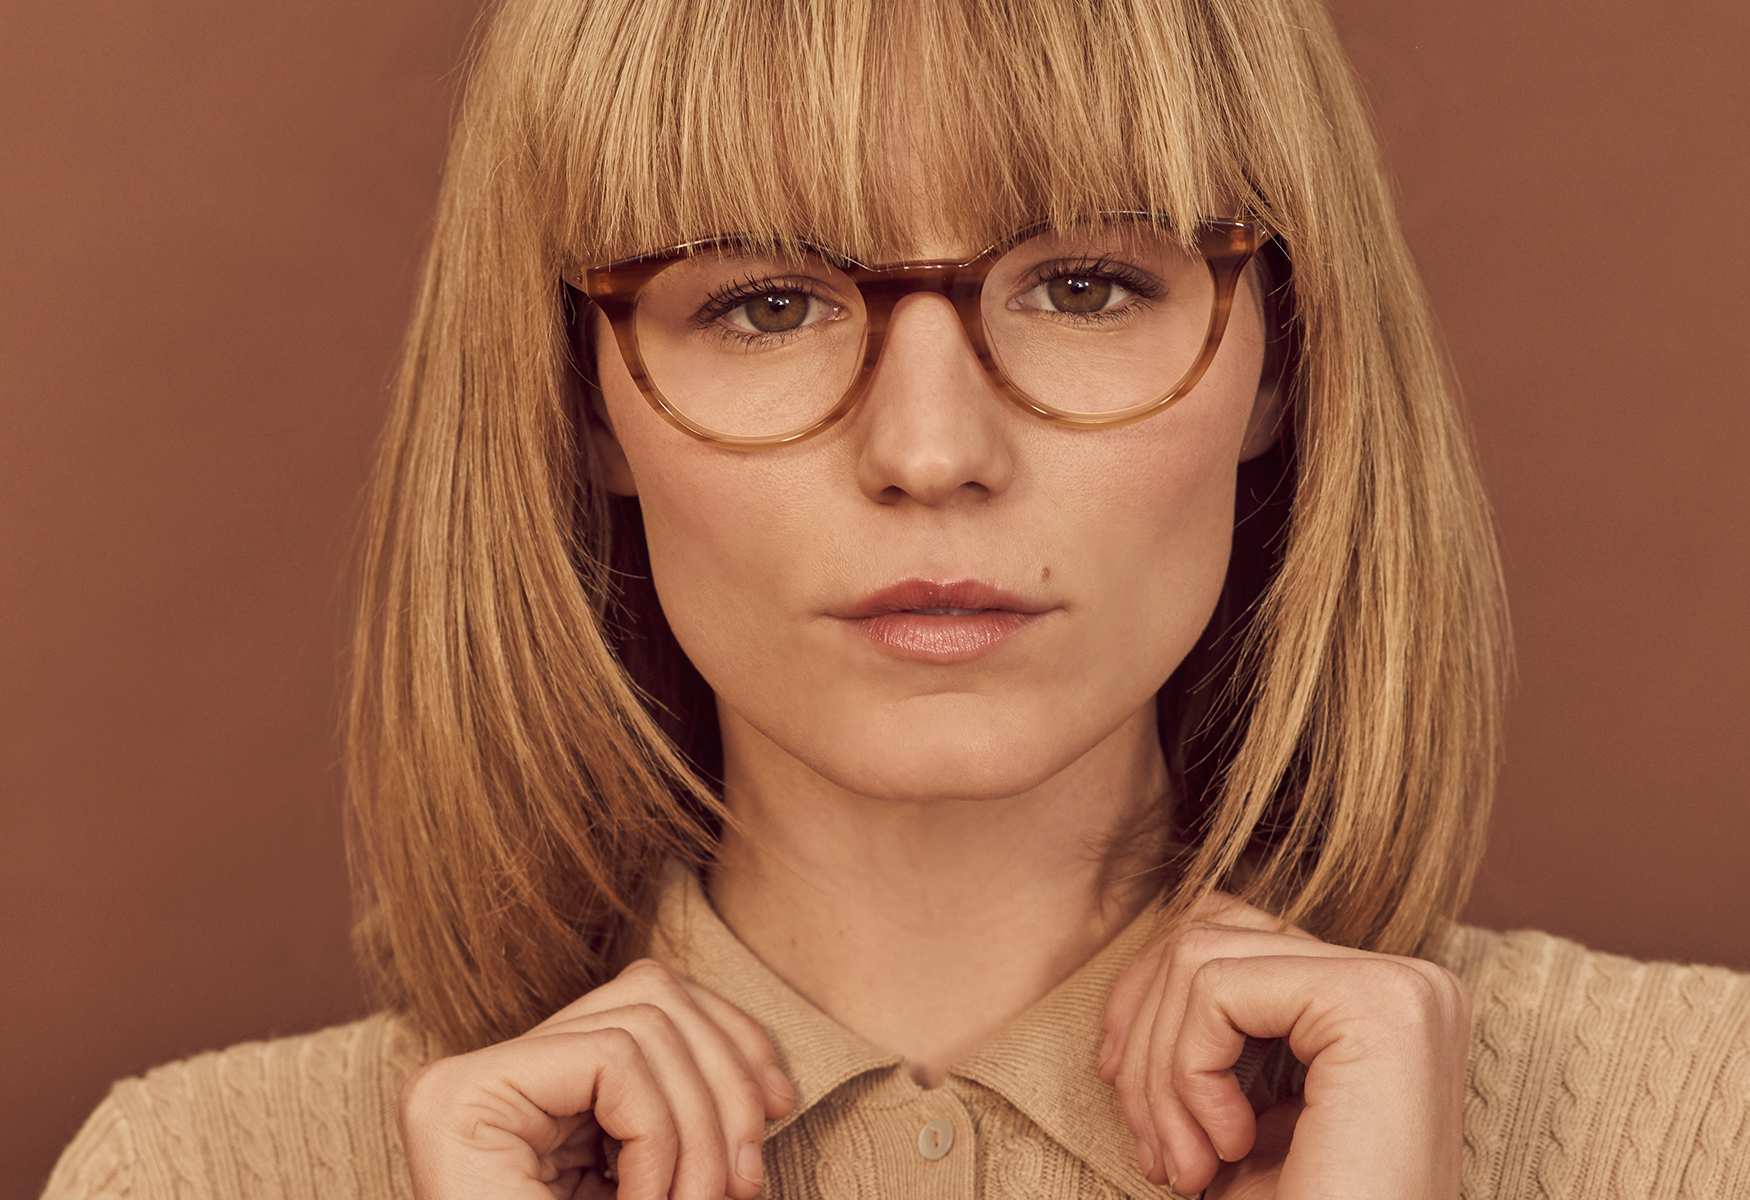 The Perfect Eyeglass Fit - What To Look For